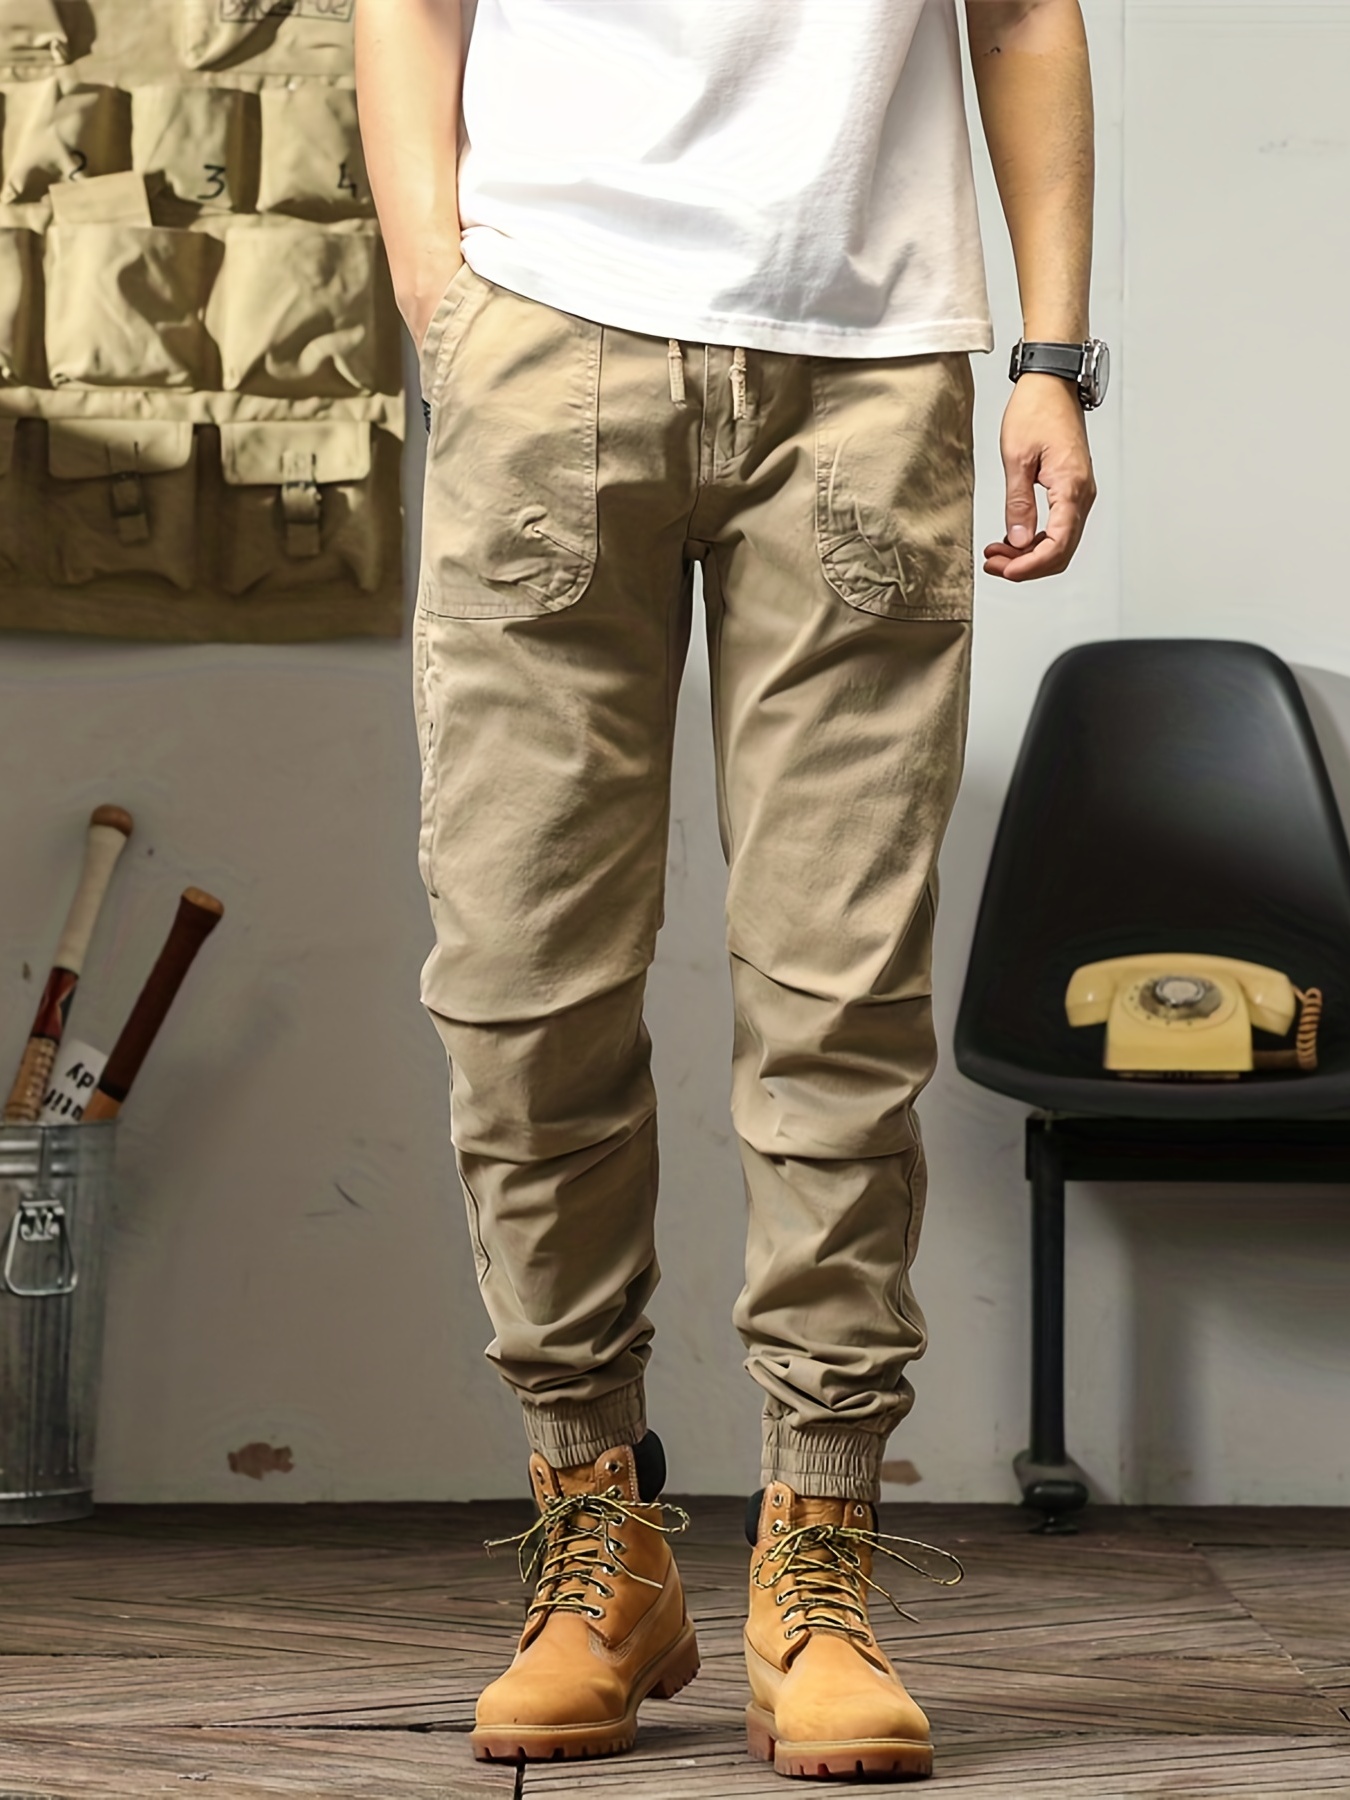 Men's Relaxed Casual Cotton Pants